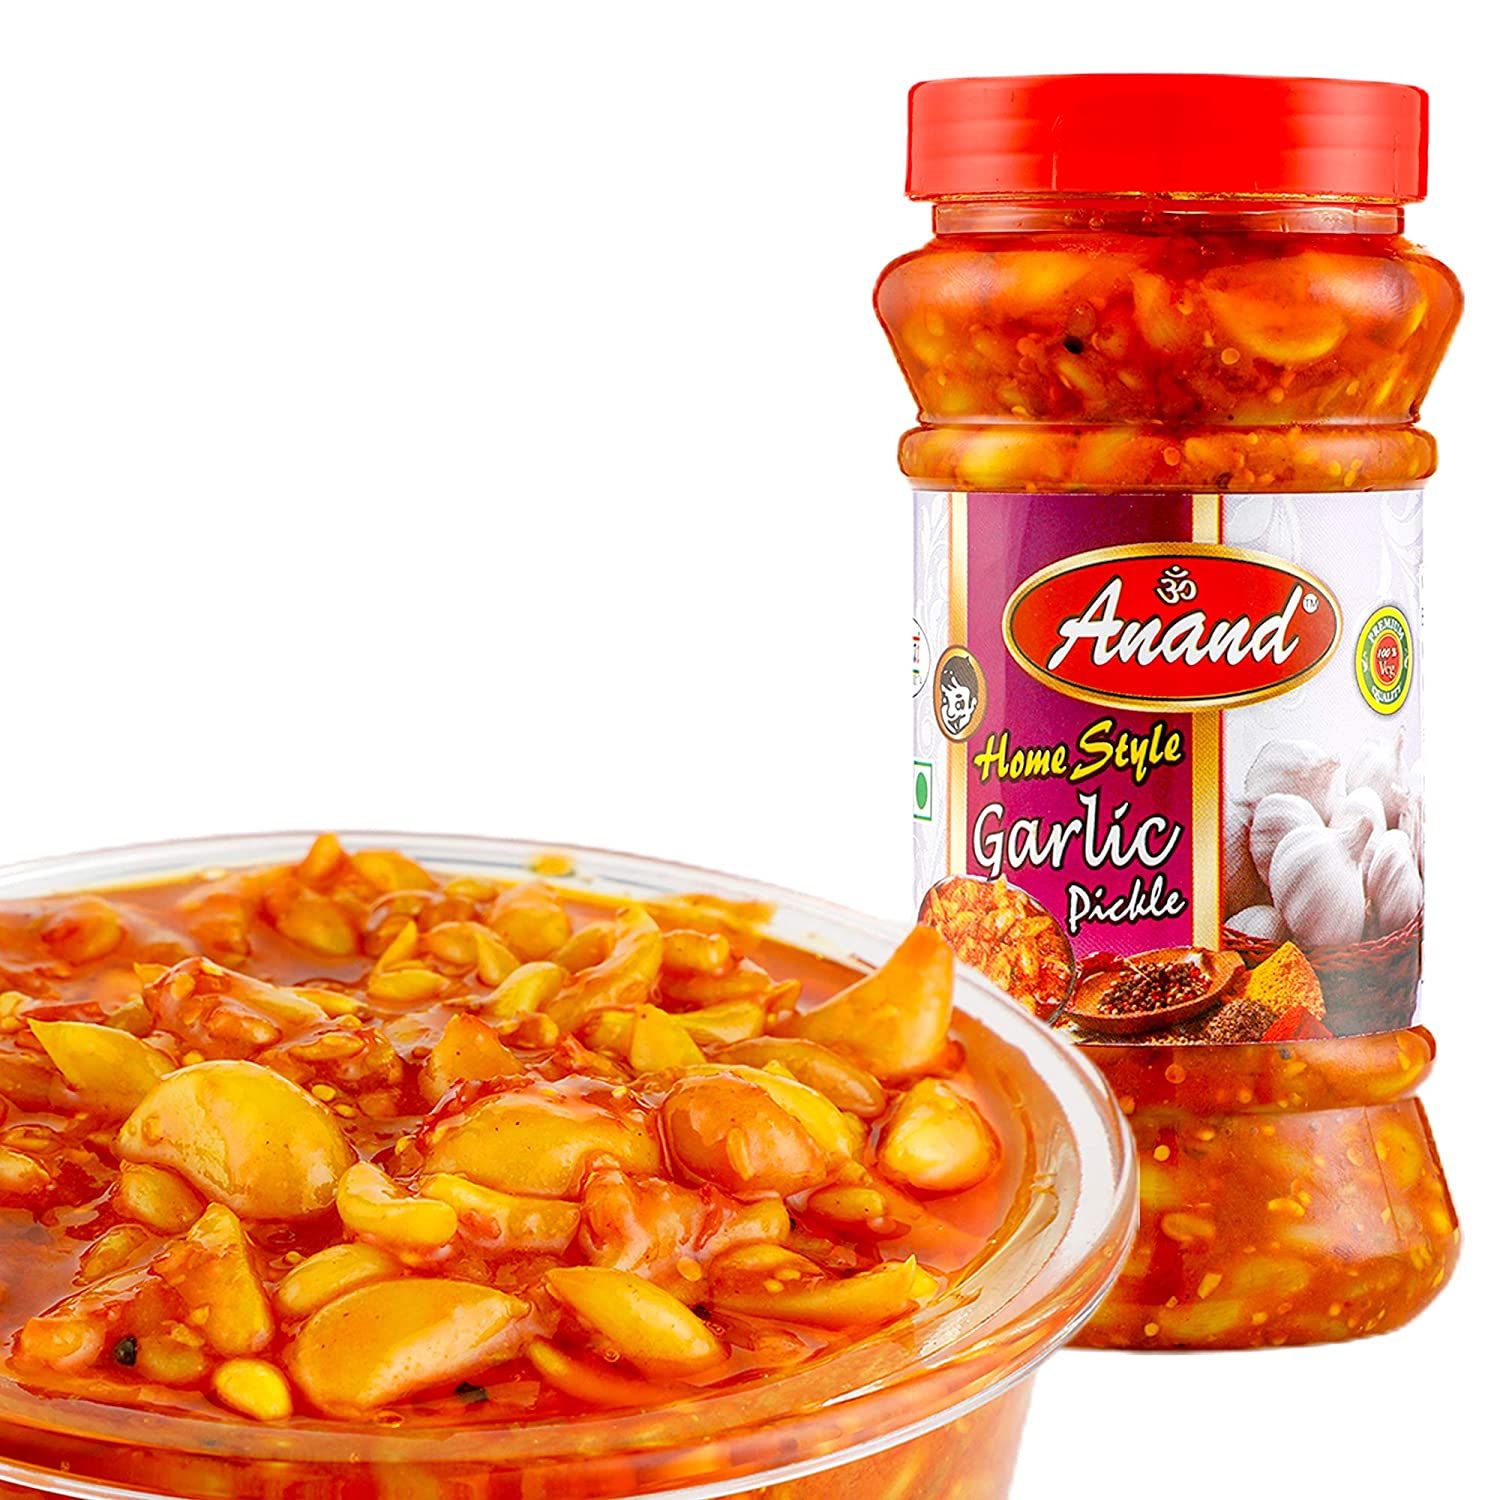 Anand Garlic Pickle Image